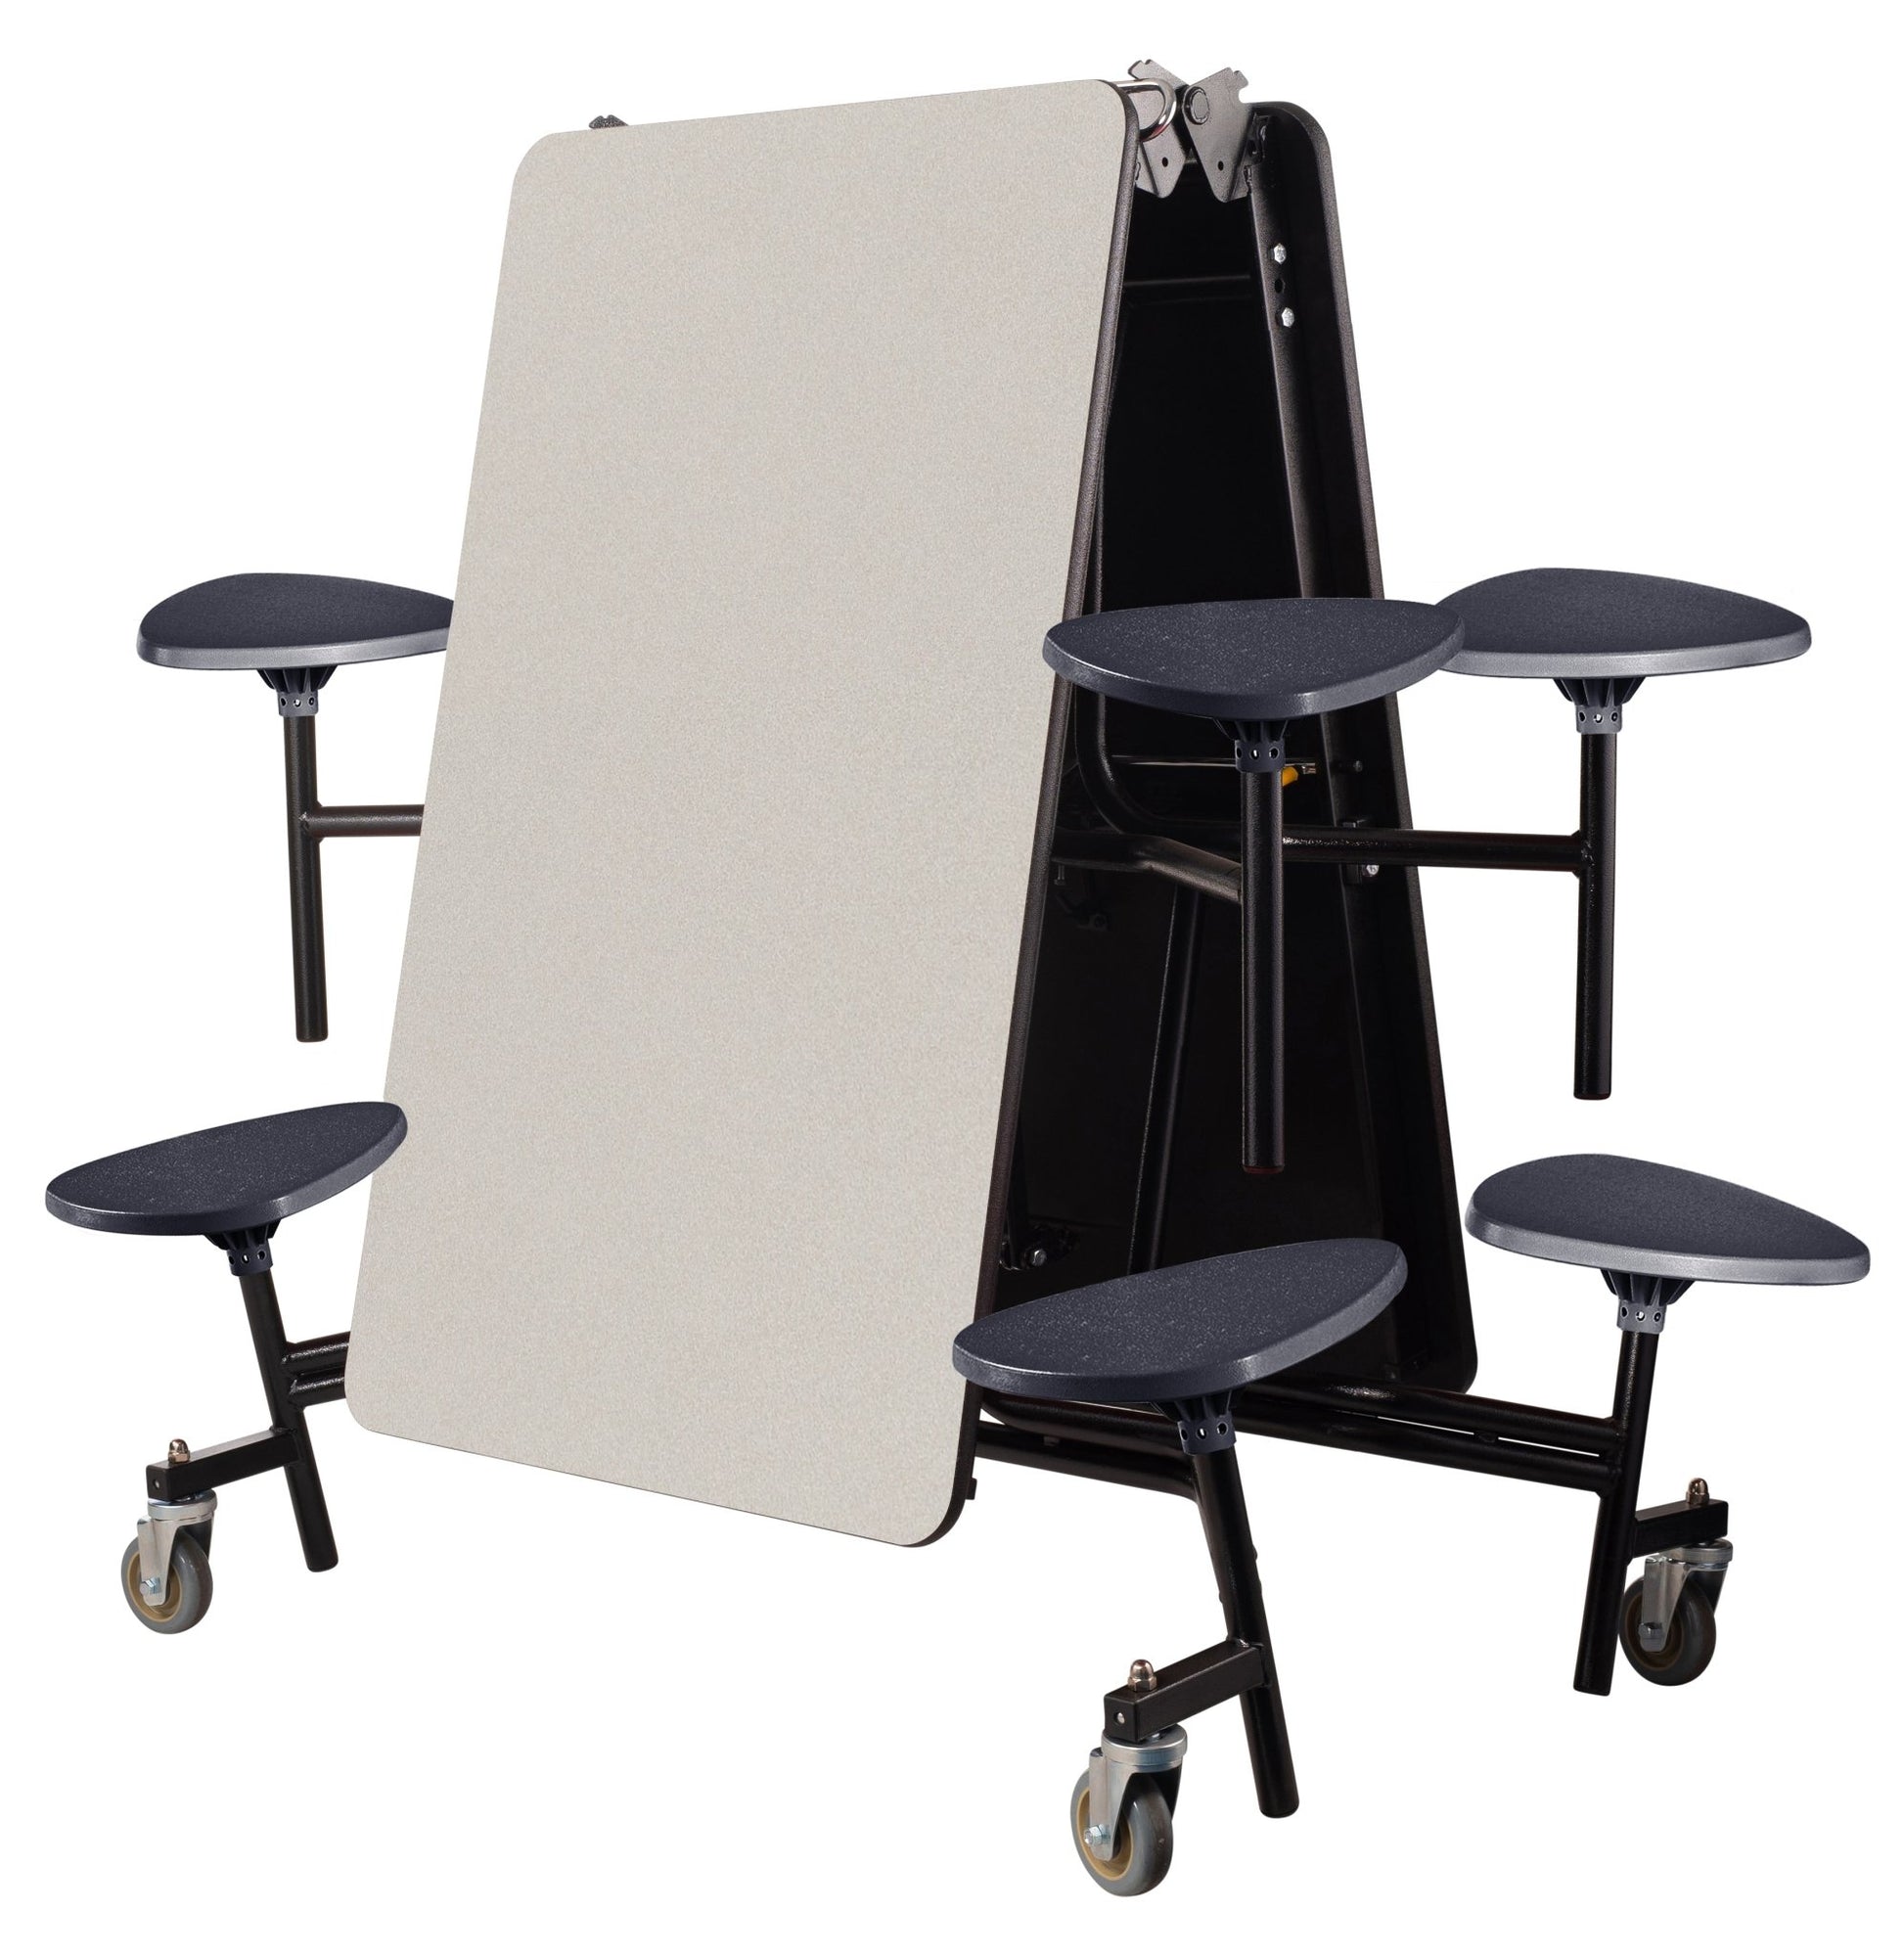 NPS Mobile Cafeteria Table - 30" W x 8' L - 8 Stools - Particleboard Core - T-Molding Edge - Black Powdercoated Frame - SchoolOutlet